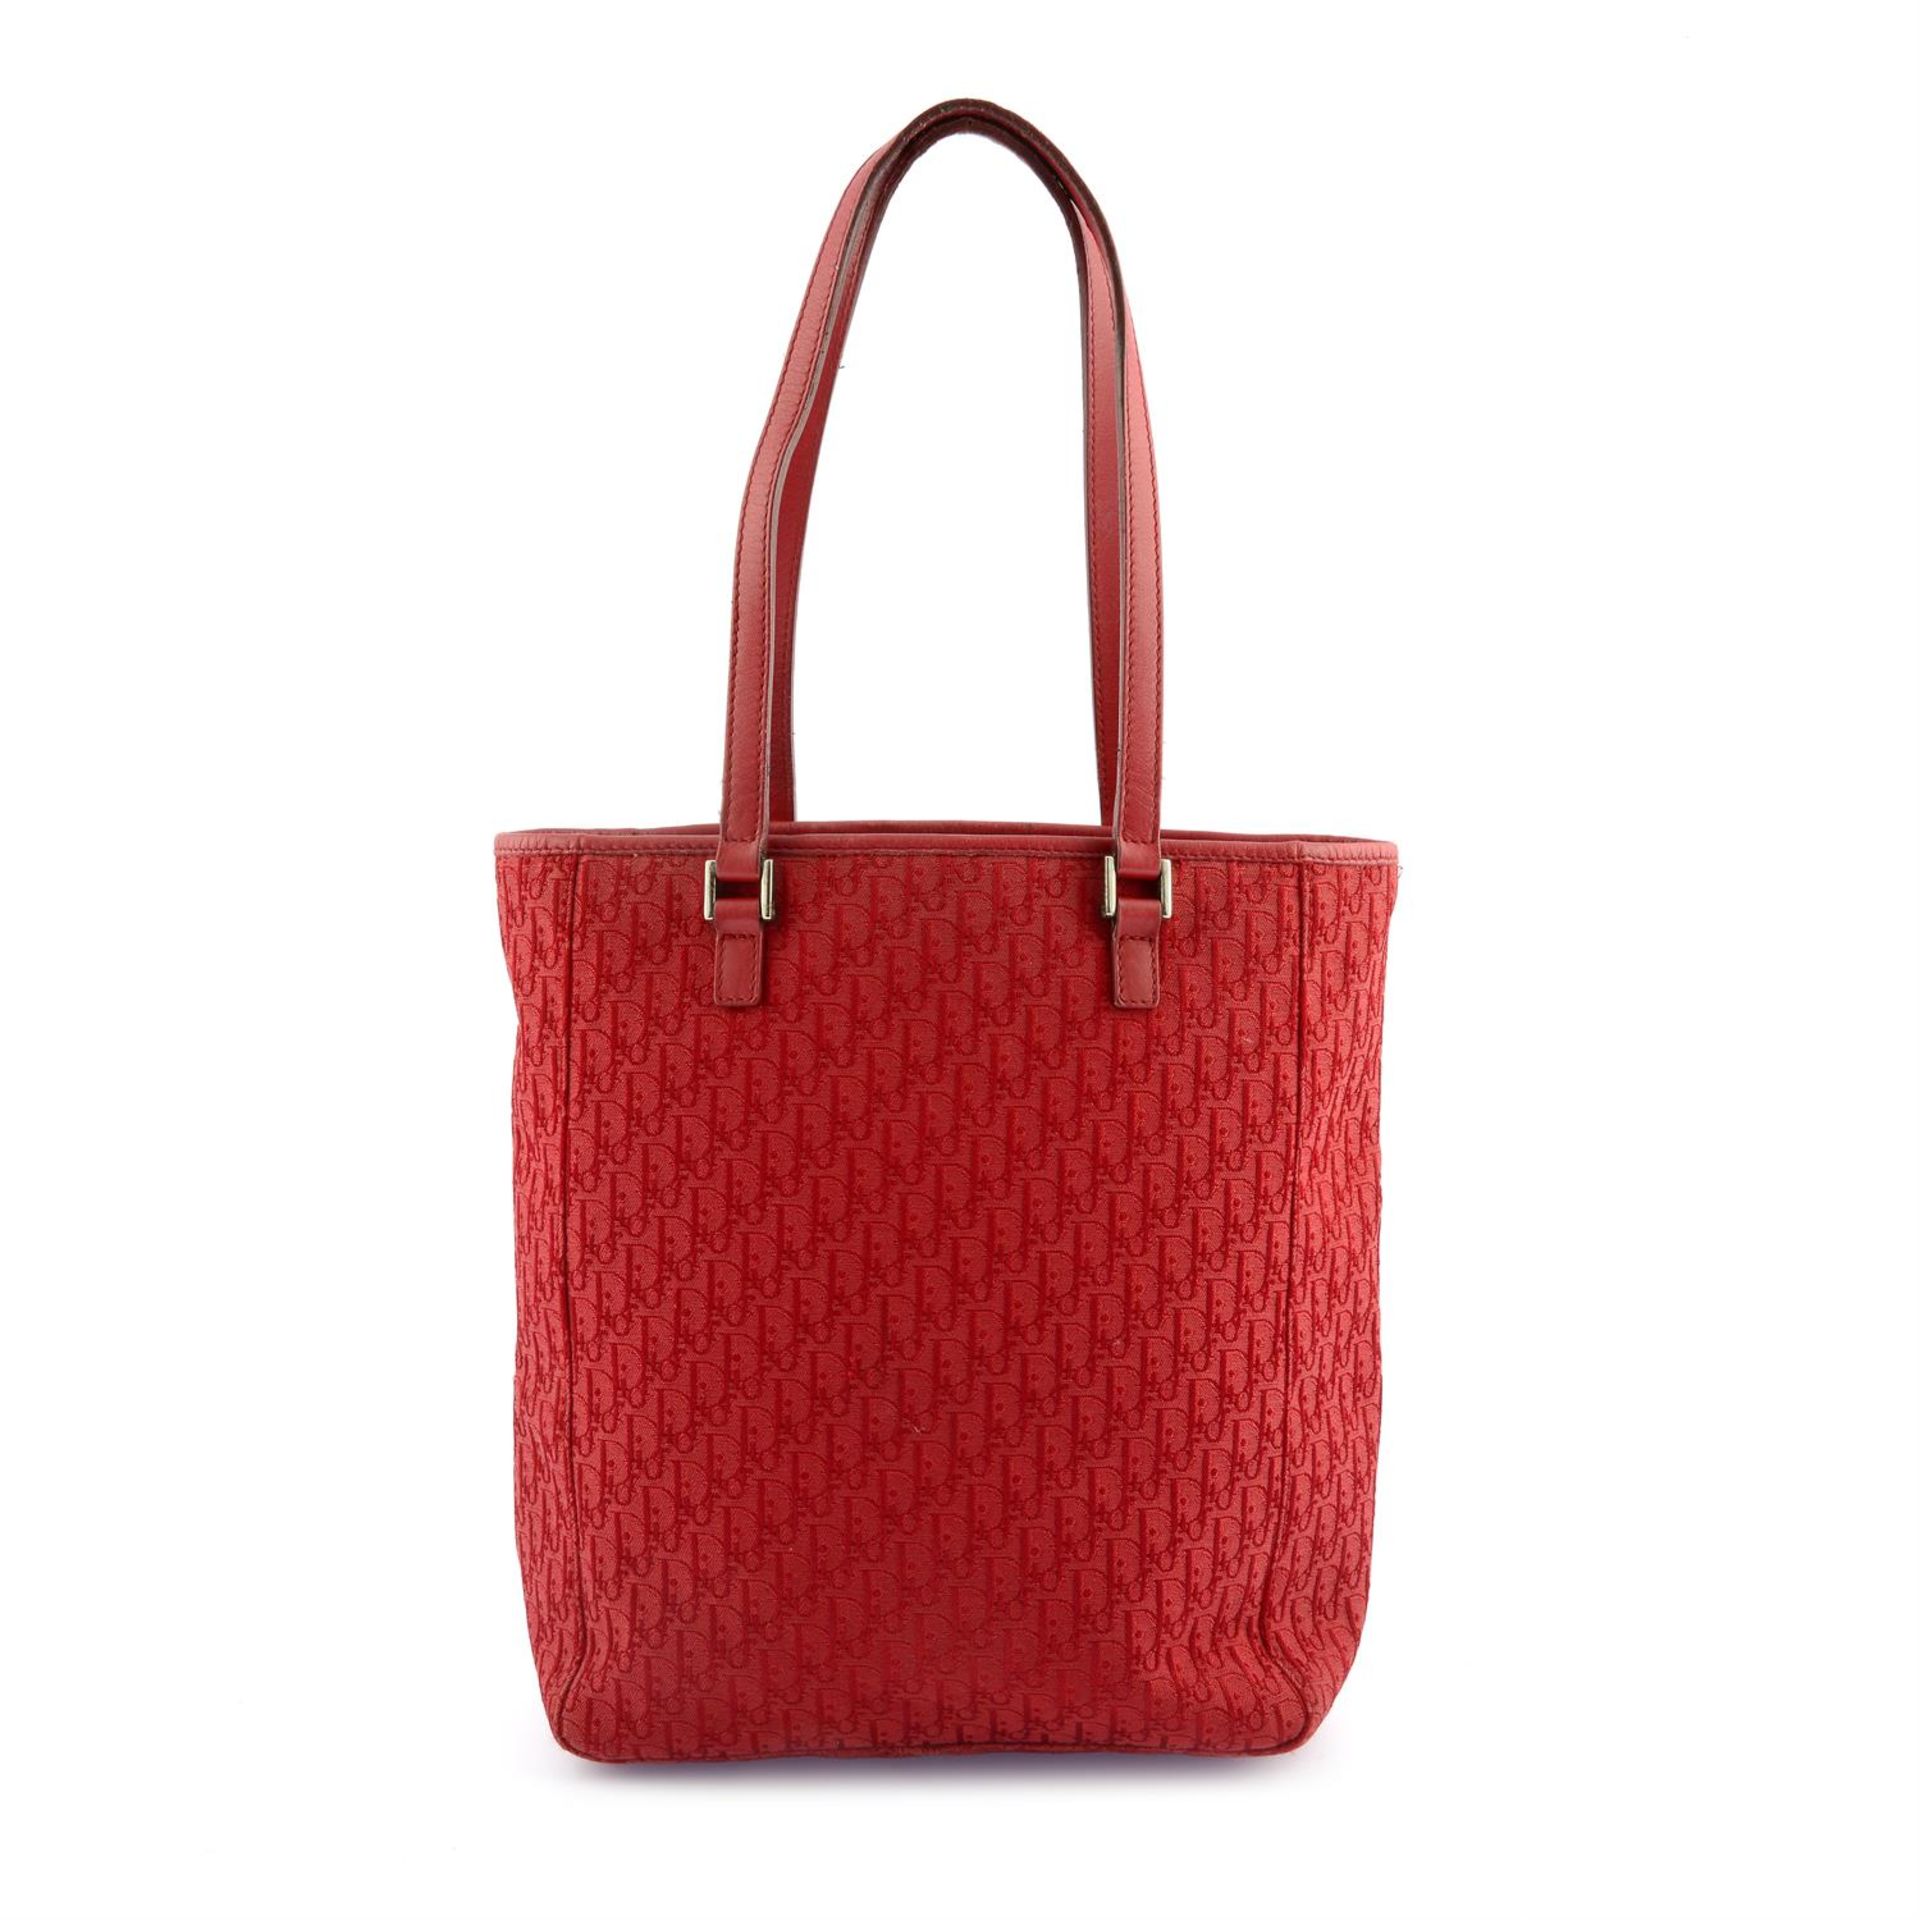 CHRISTIAN DIOR - a red canvas Trotter tote.